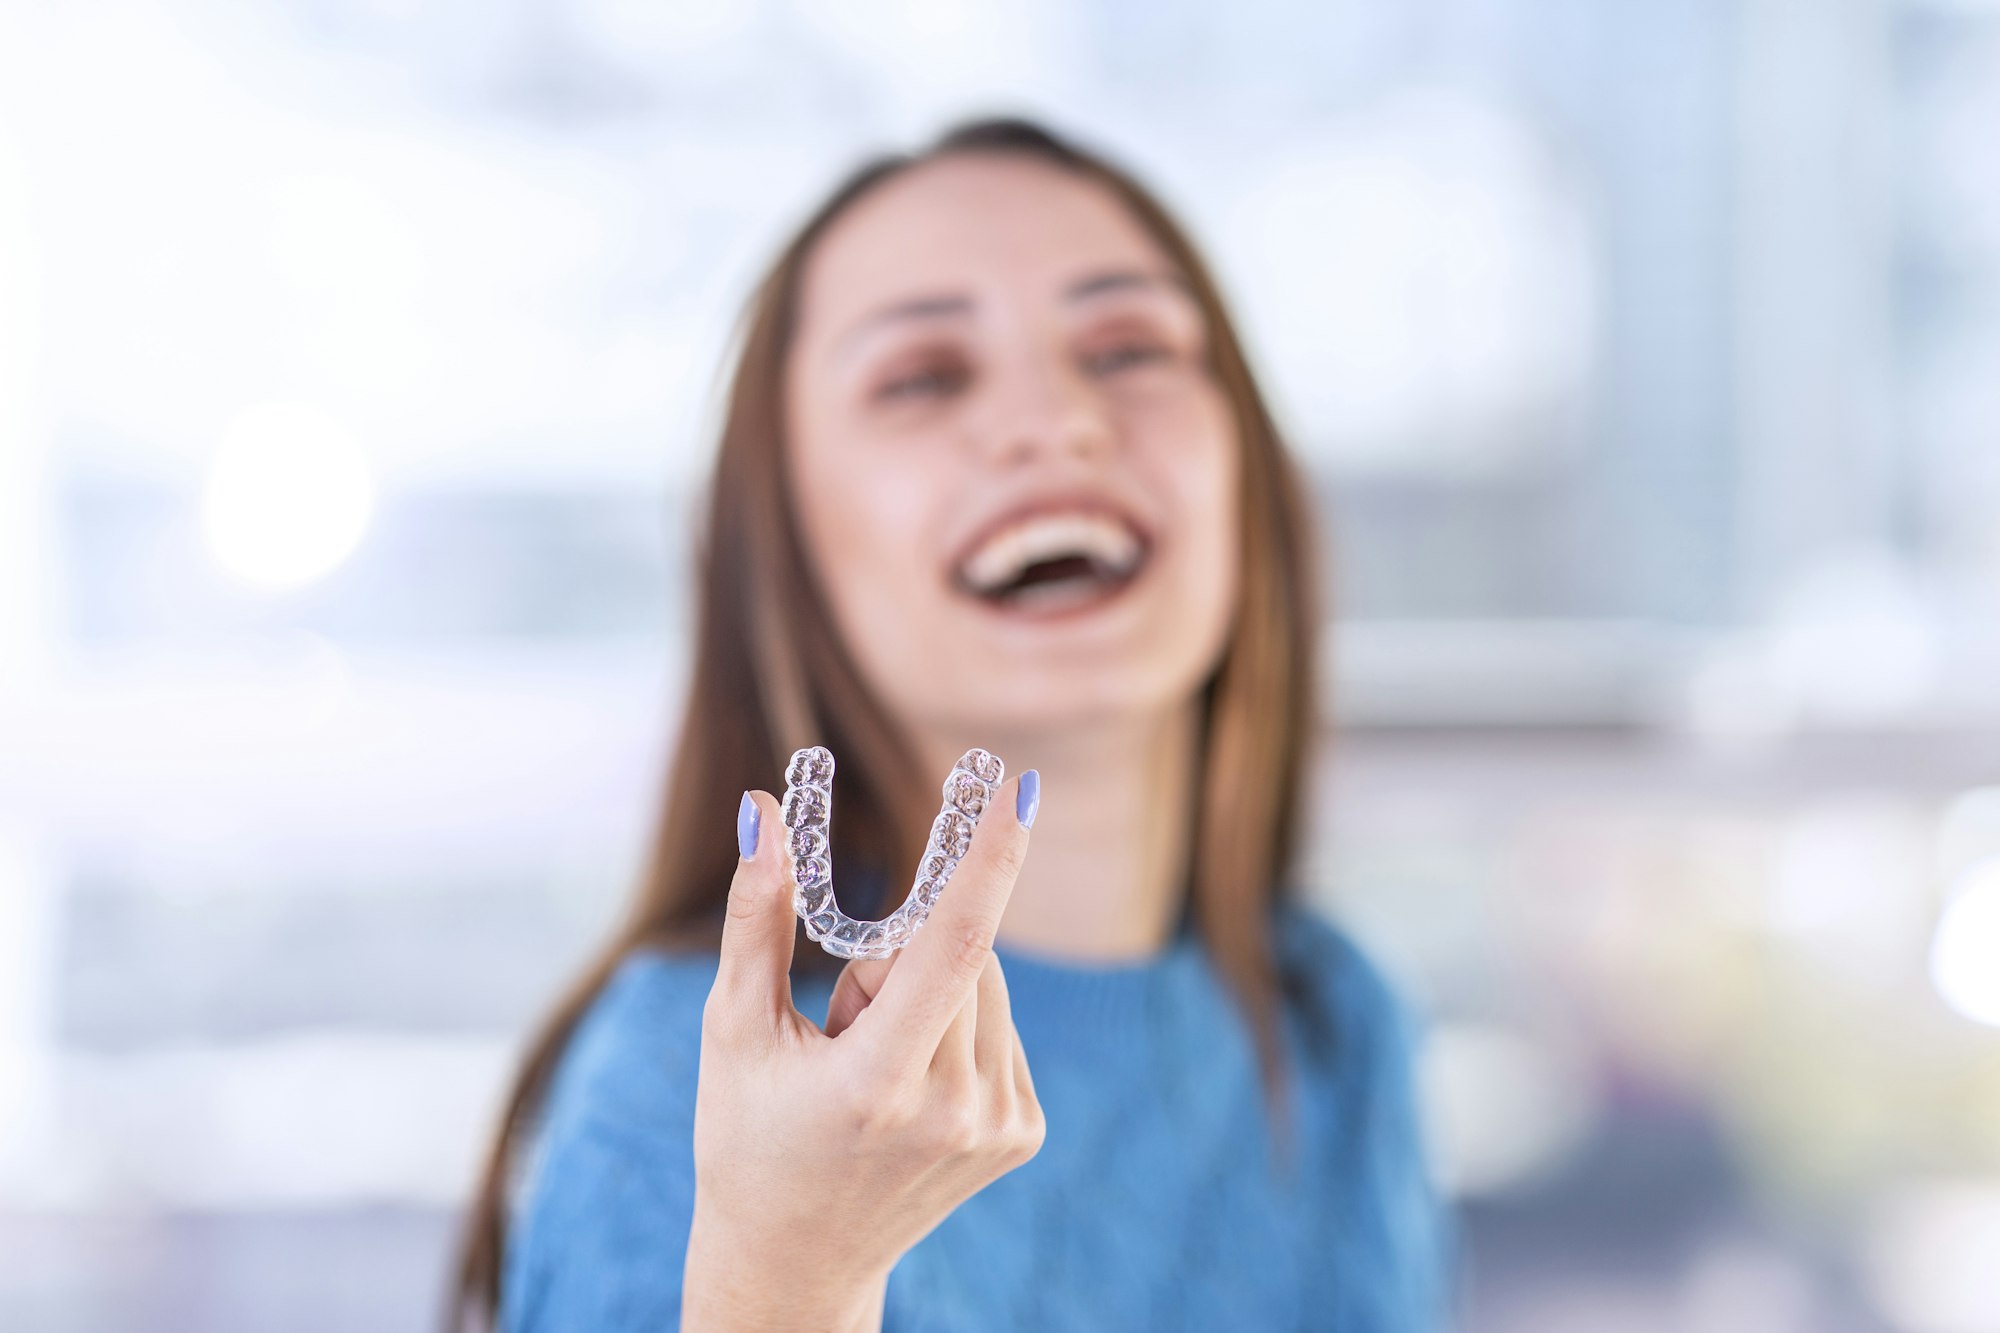 "Woman holding Invisalign aligner, representing FAQs about Invisalign at Wichita Family Dental.